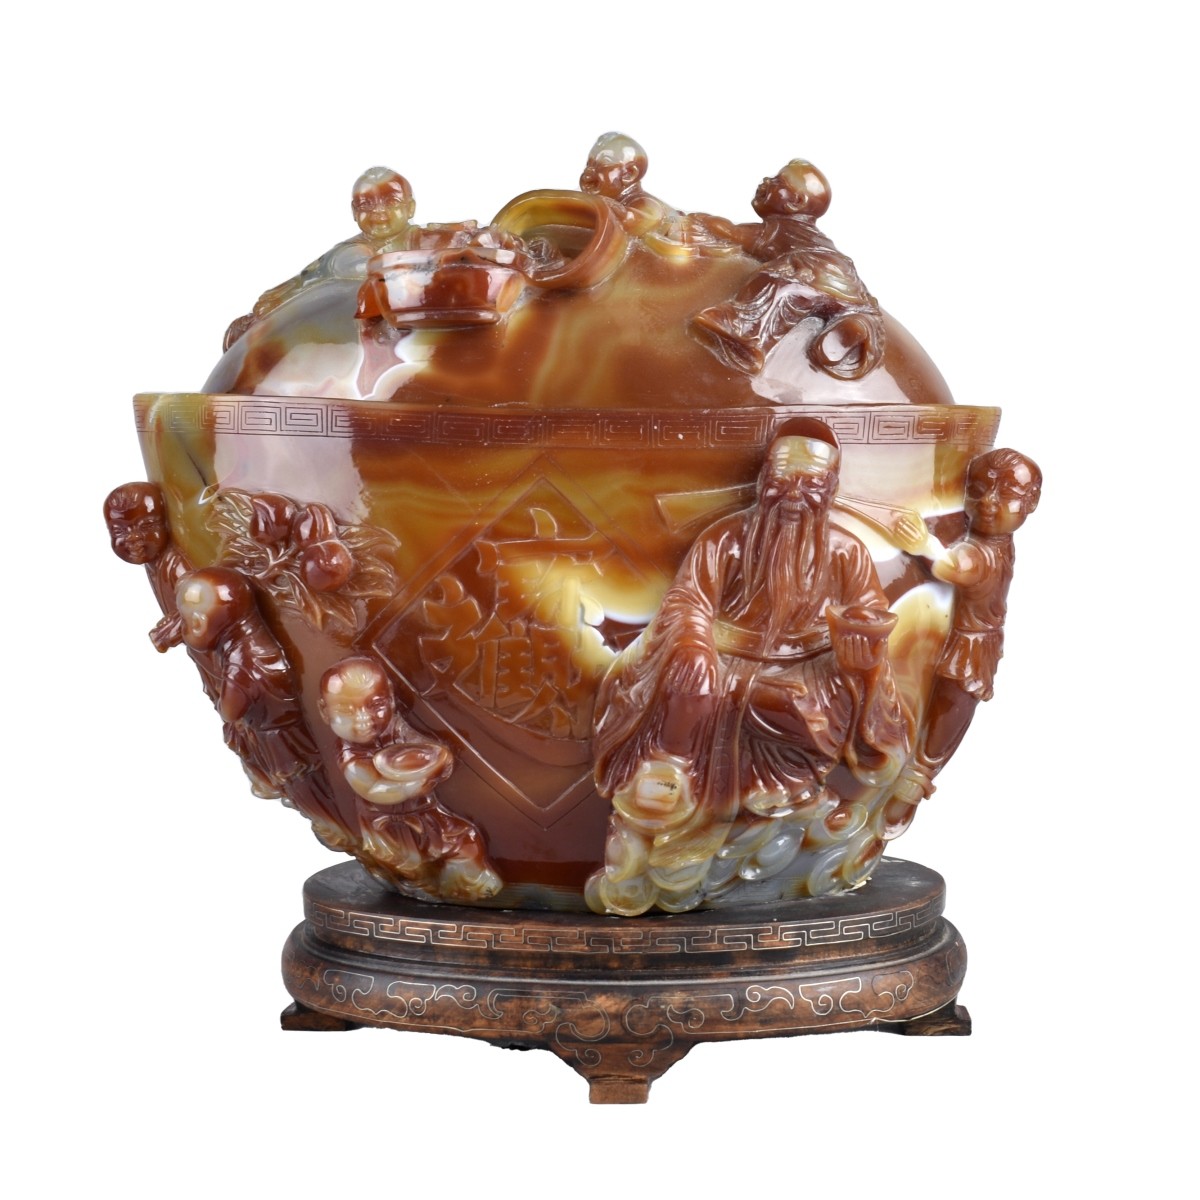 Chinese Carnelian Covered Bowl